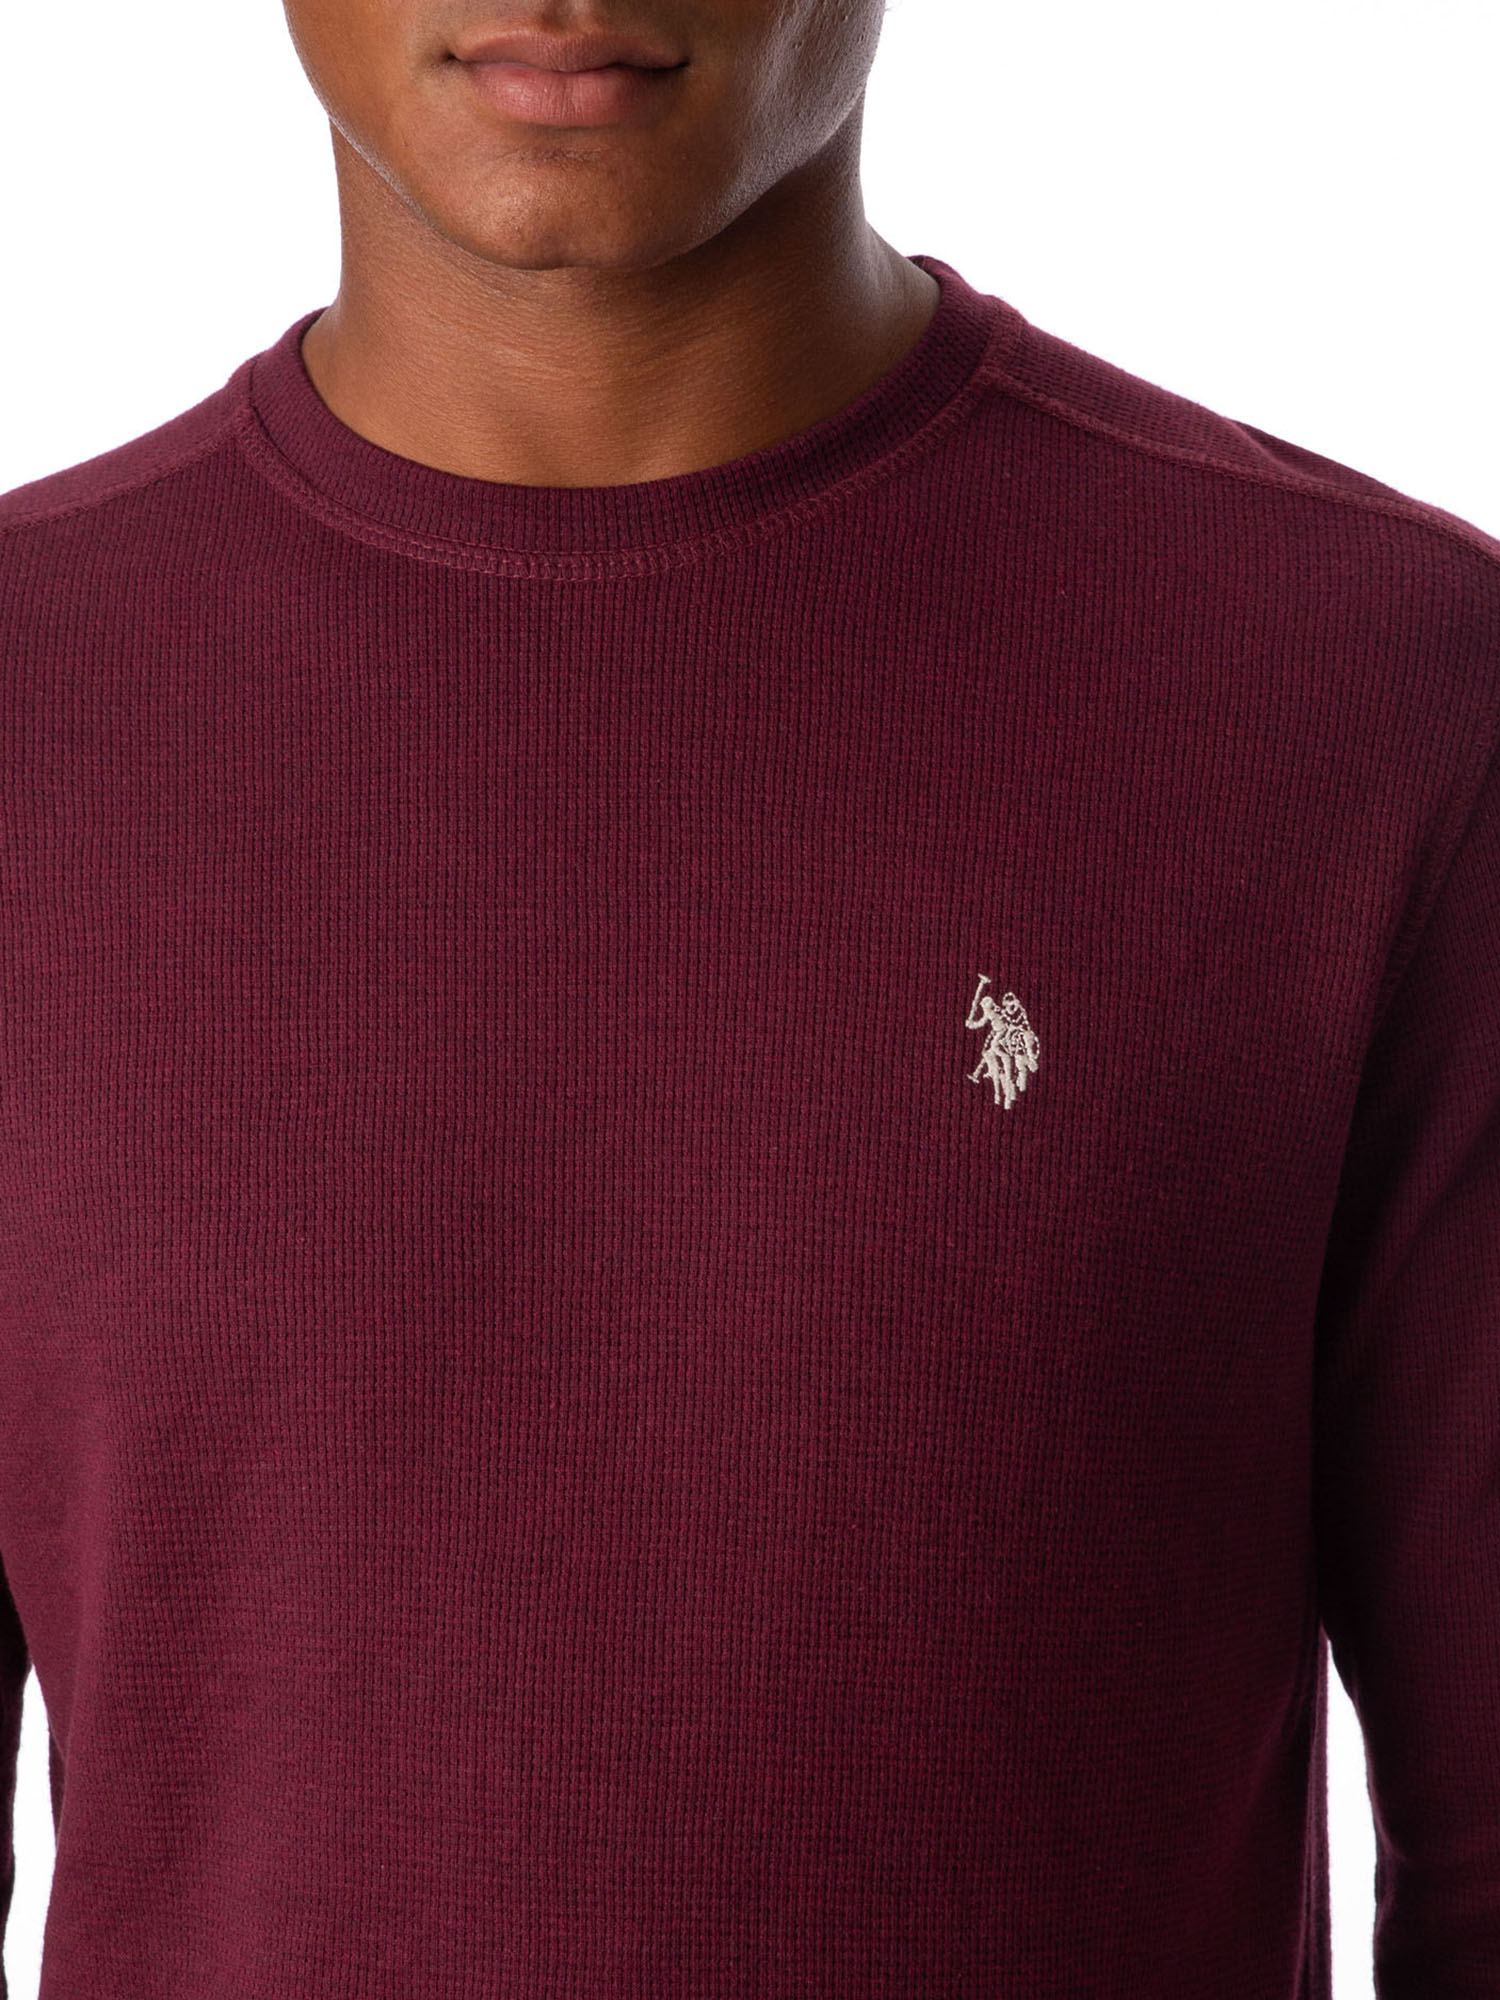 U.S. Polo Assn. Men's Knit Thermal T-Shirt - image 3 of 5